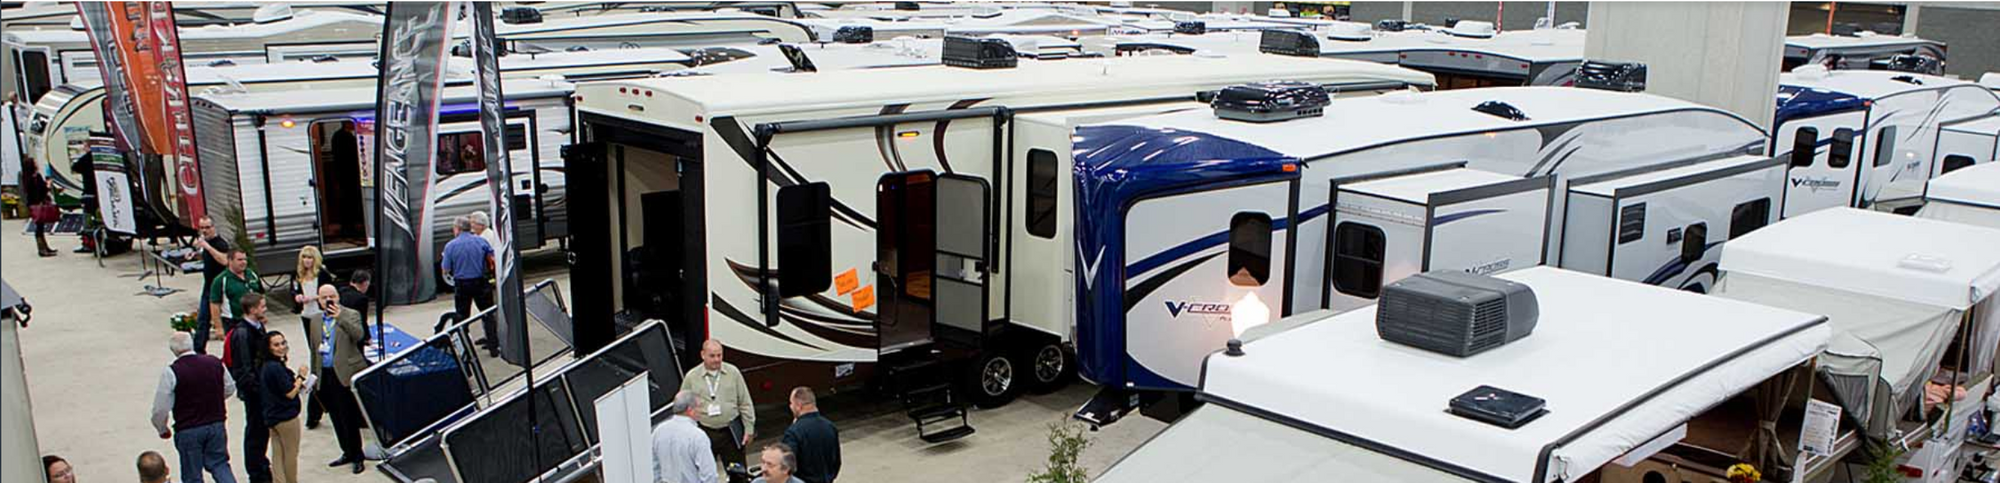 Top 10 Things To See At The Toronto RV Show & Sale